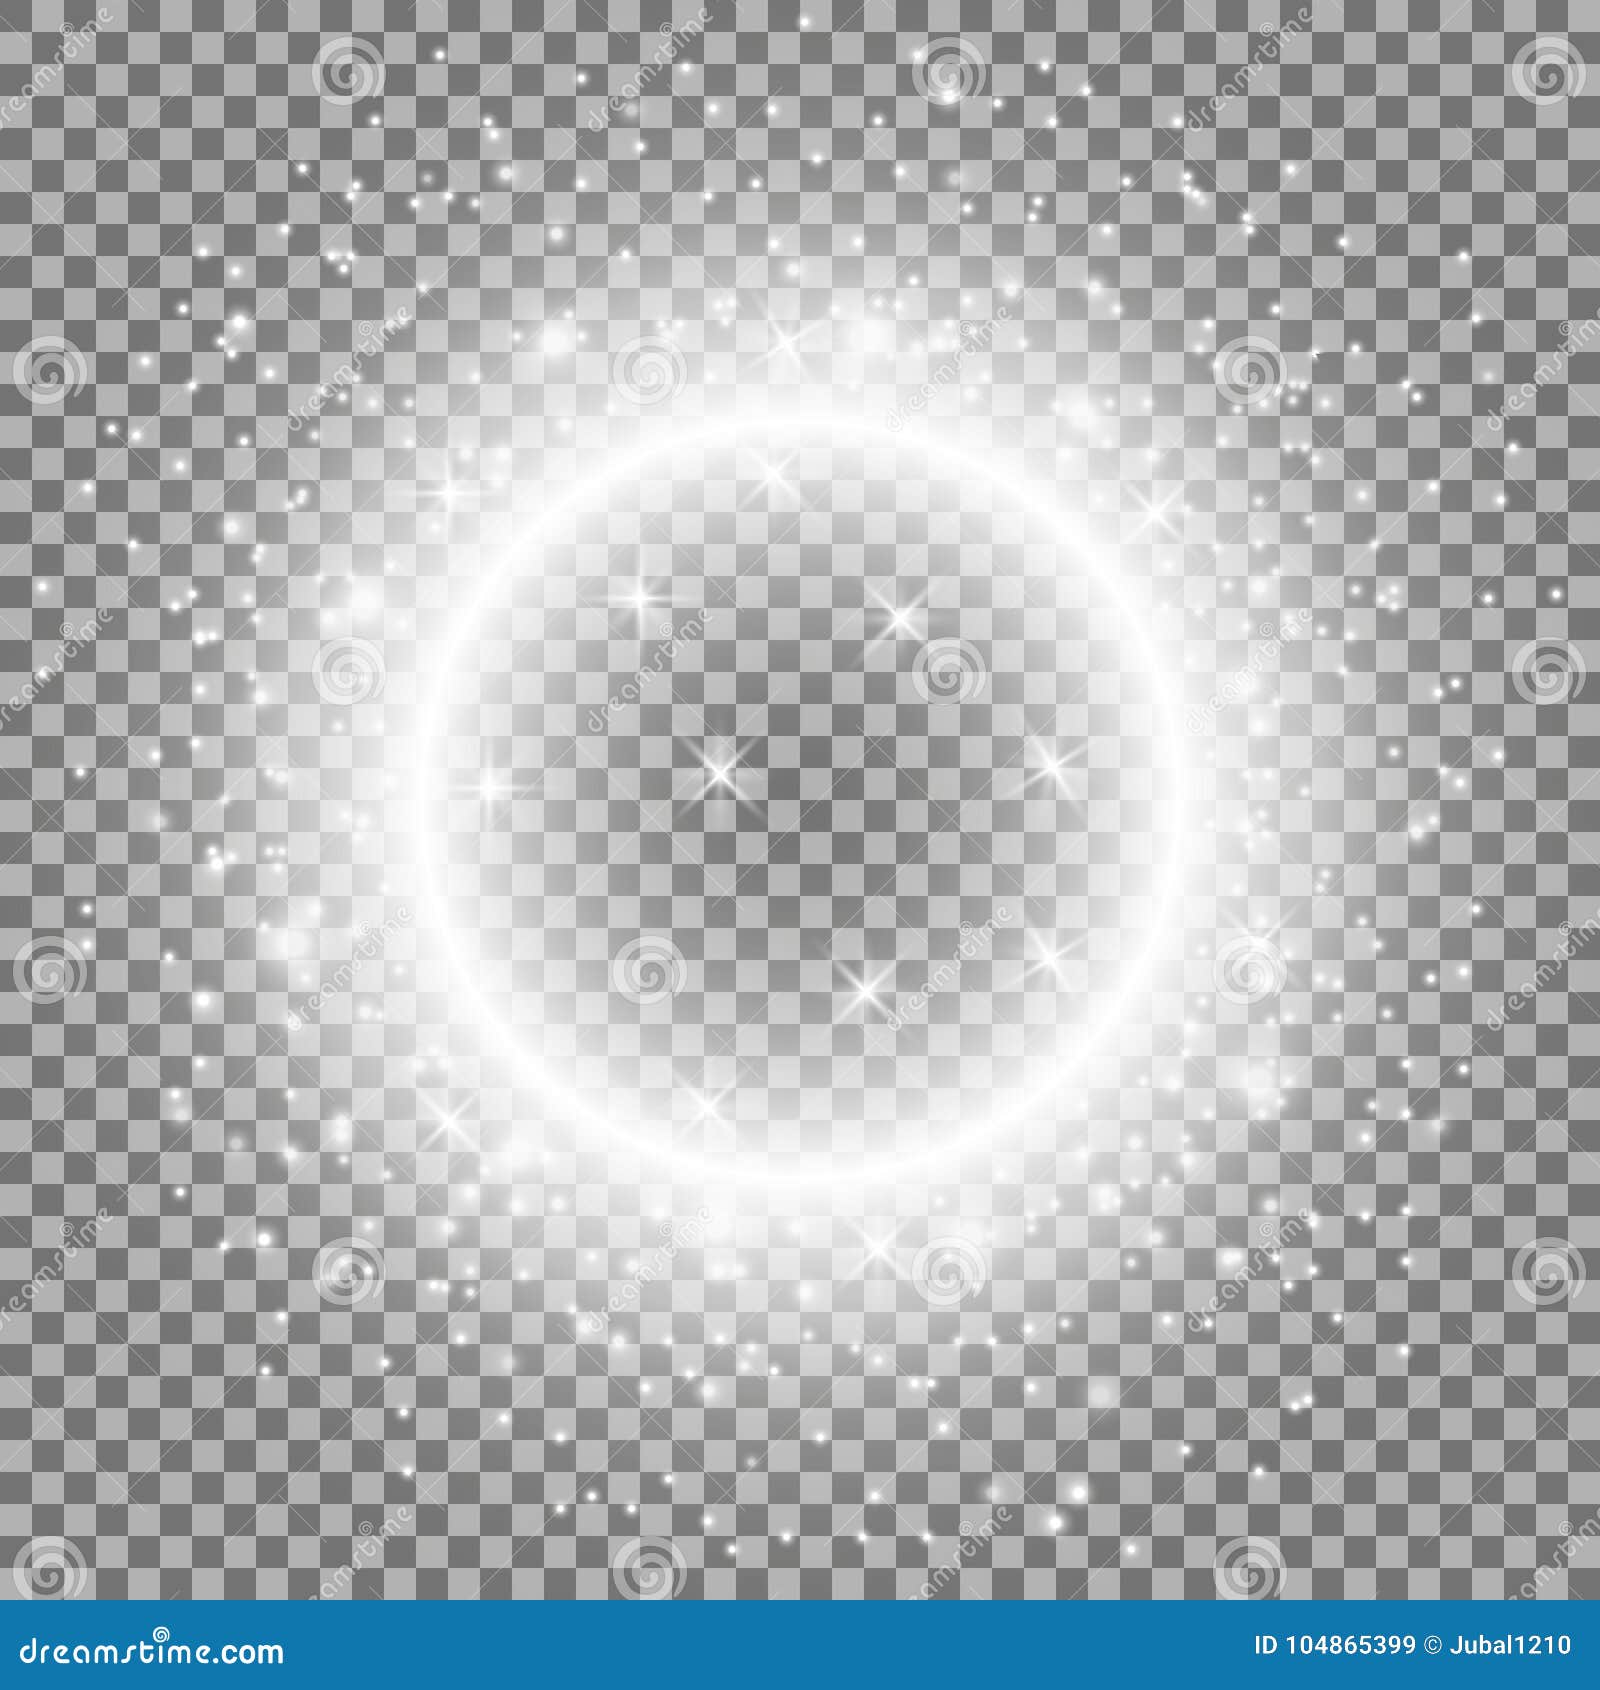 Light Circle Stock Photos, Images and Backgrounds for Free Download